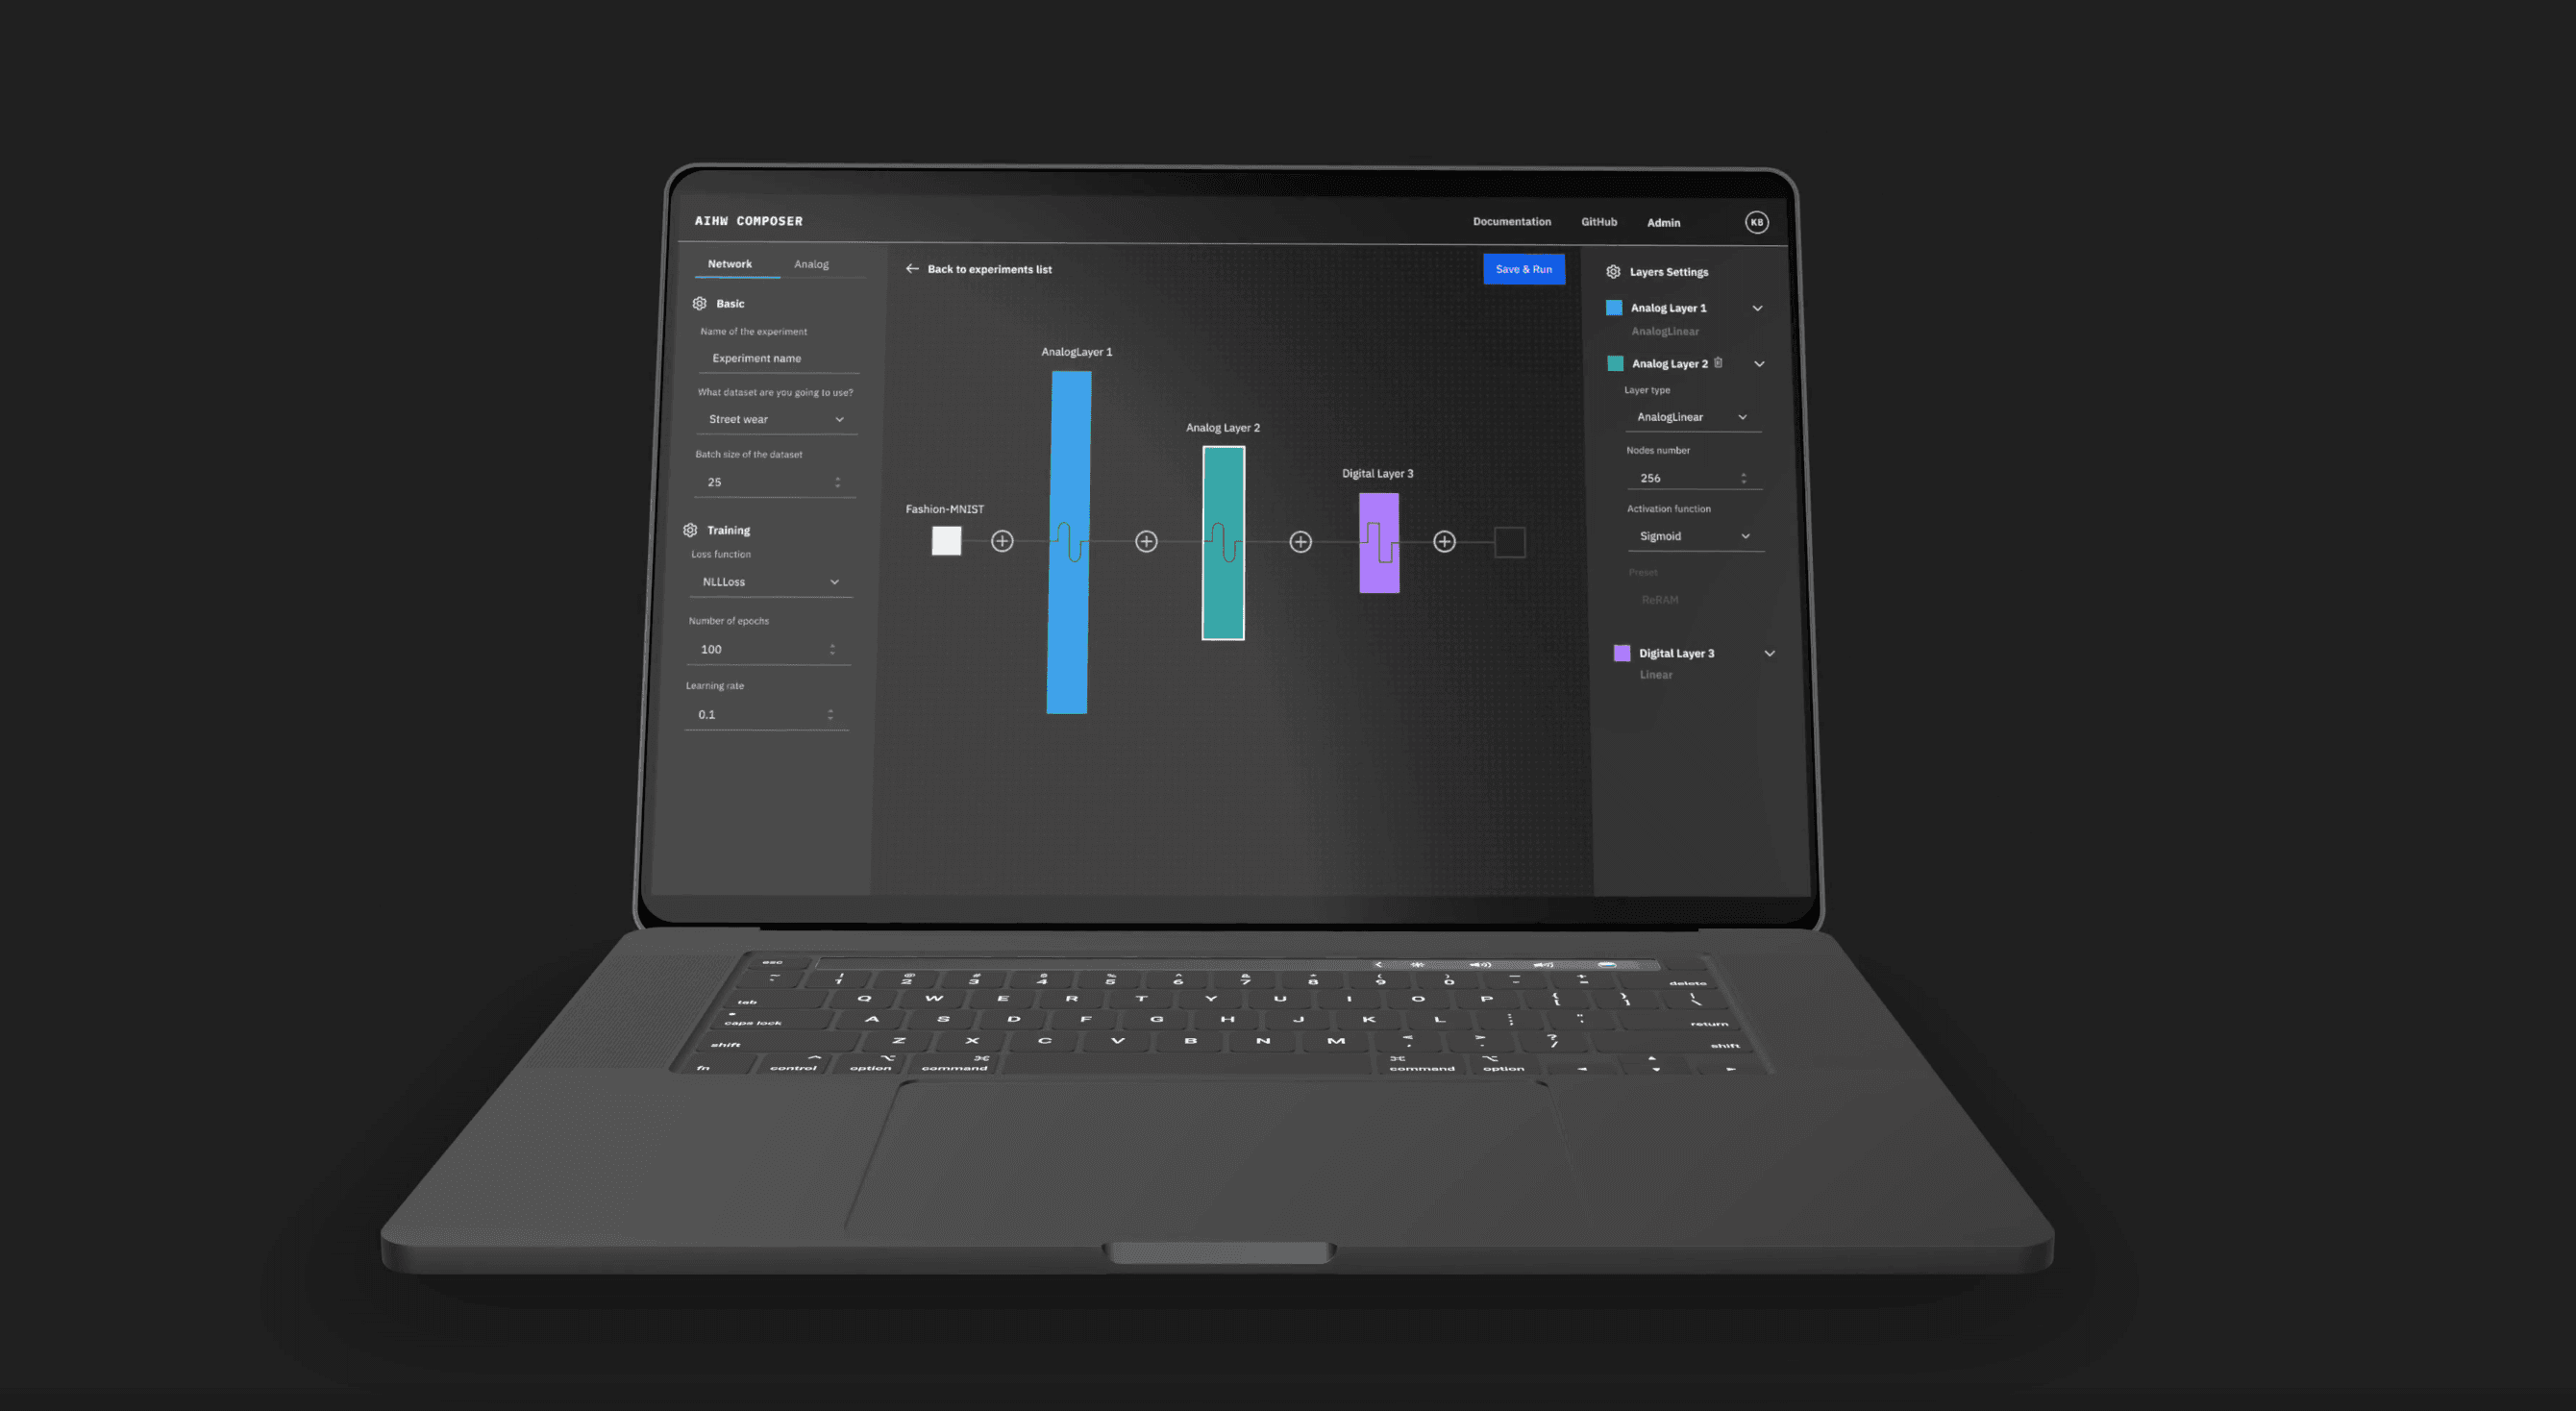 The landing page for IBM Research's AI Hardware Composer presented on a rendering of a laptop